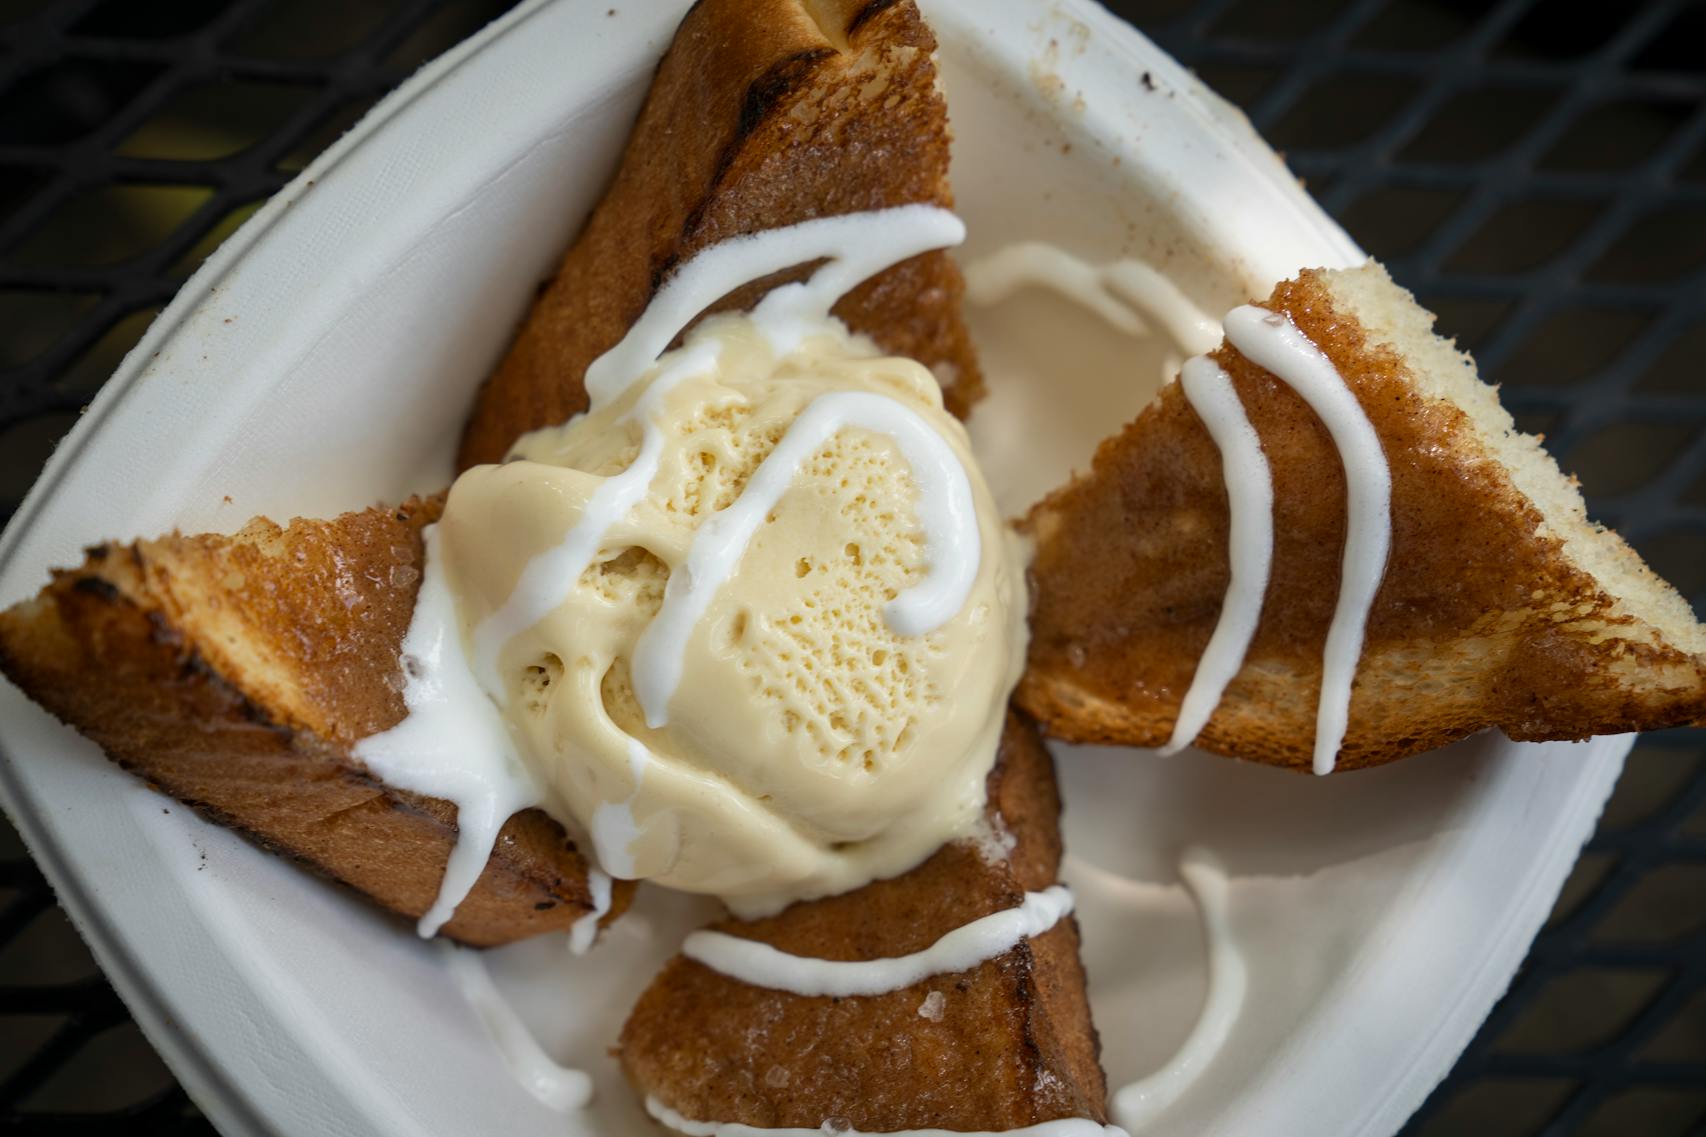 Irish Butter Ice Cream Over Brown Sugar Cinnamon Toast from Blue Moon Dine-In Theater. The new foods of the 2023 Minnesota State Fair photographed on the first day of the fair in Falcon Heights, Minn. on Tuesday, Aug. 8, 2023. ] LEILA NAVIDI • leila.navidi@startribune.com